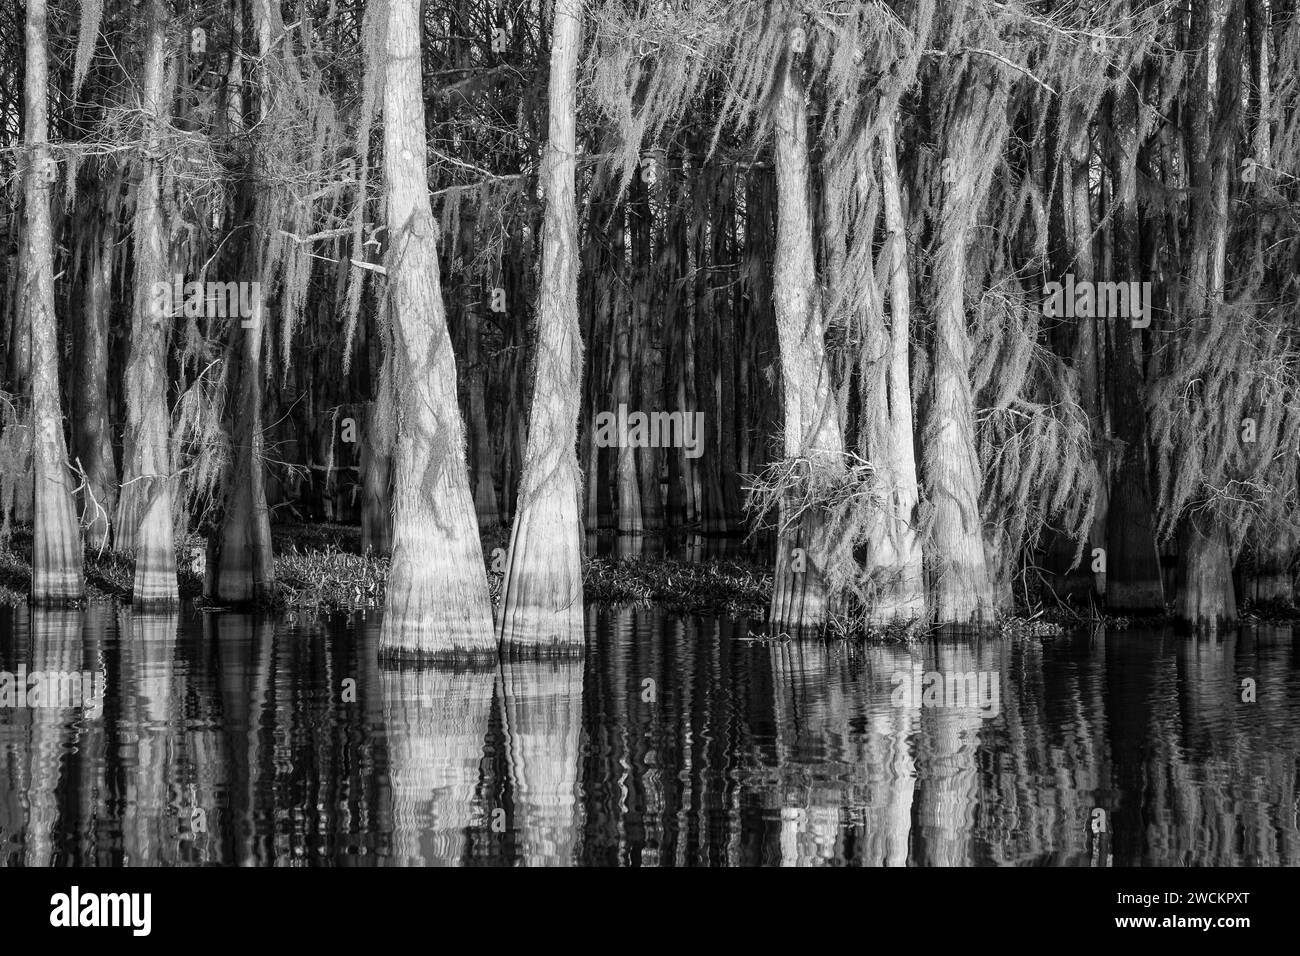 Sunrise light on bald cypress trees draped with Spanish moss reflected in a lake in the Atchafalaya Basin in Louisiana. Stock Photo